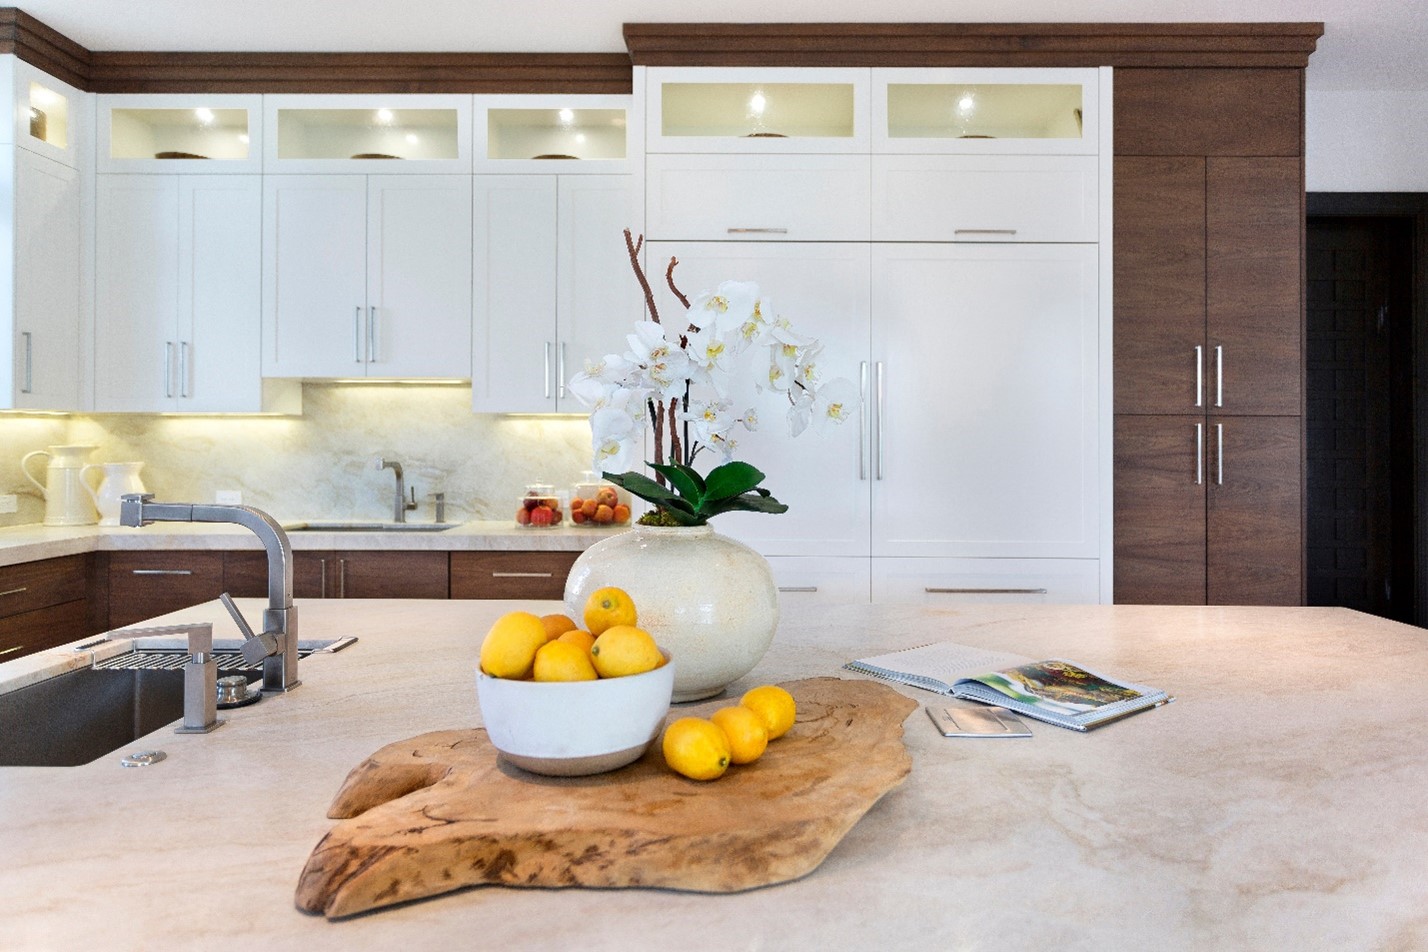 a staged kitchen in a home for sale with lemons and orchids on display